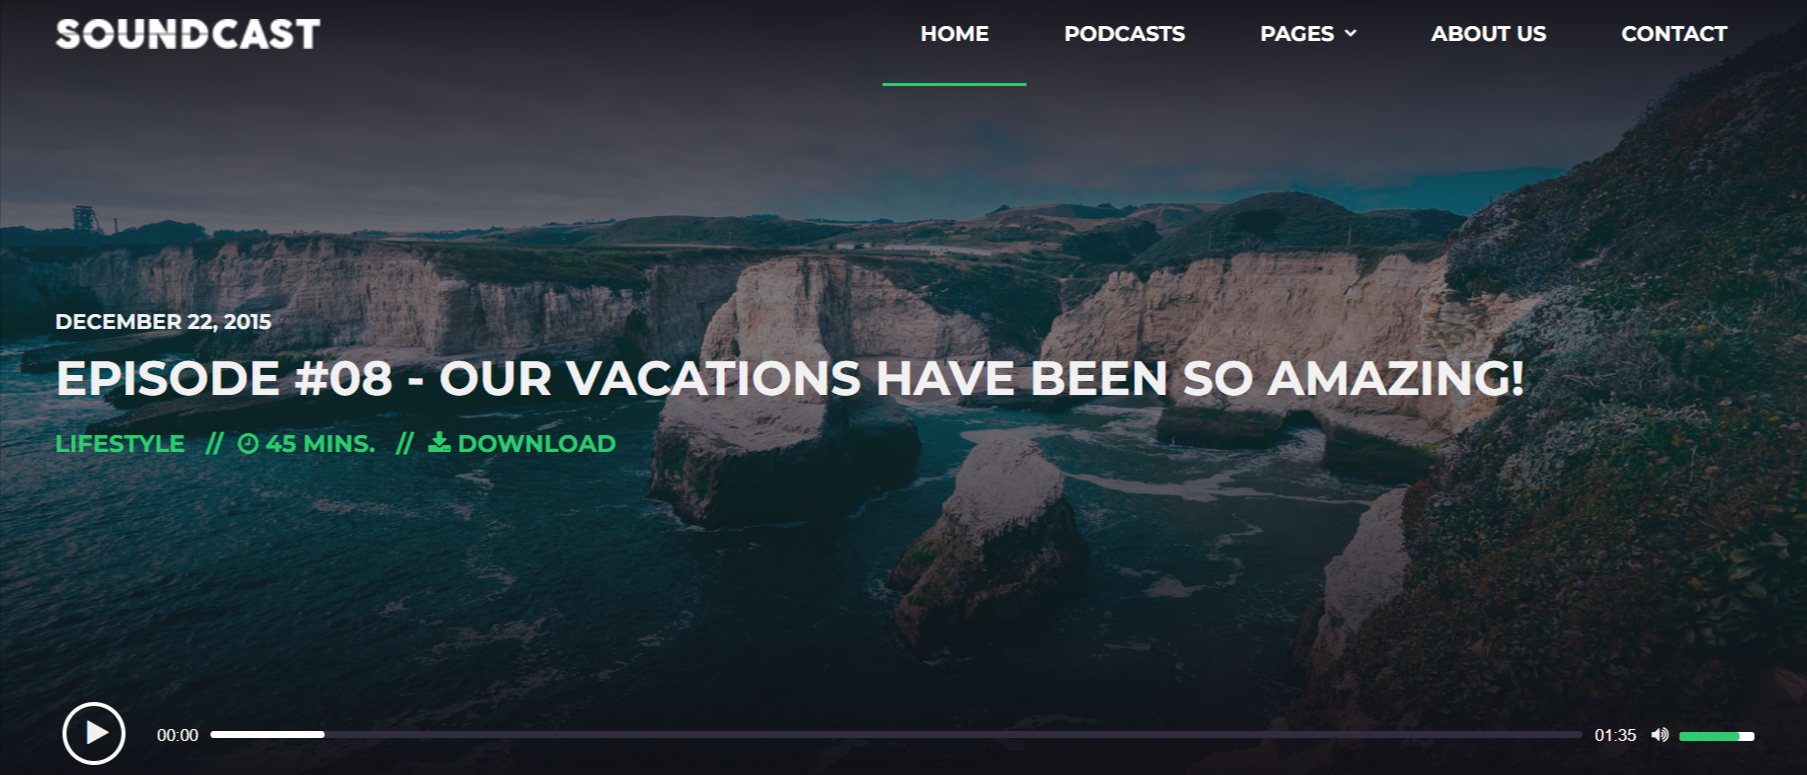 Soundcast - Best WordPress Podcast Themes for Podcasters